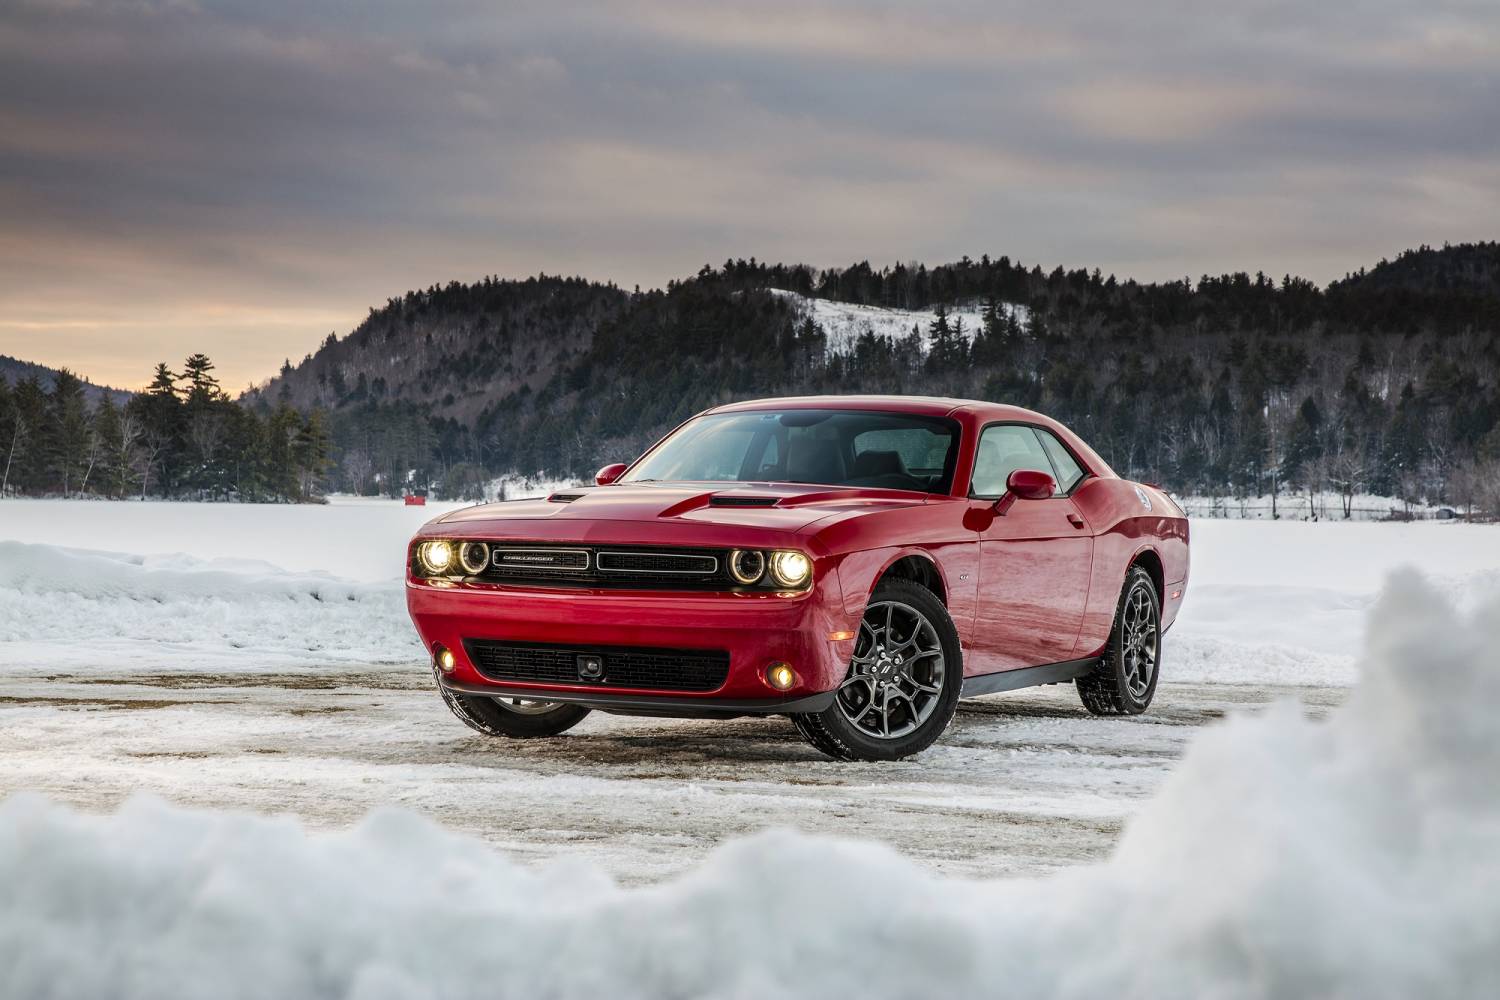 Dodge Challenger GT AWD Swoons At Snow